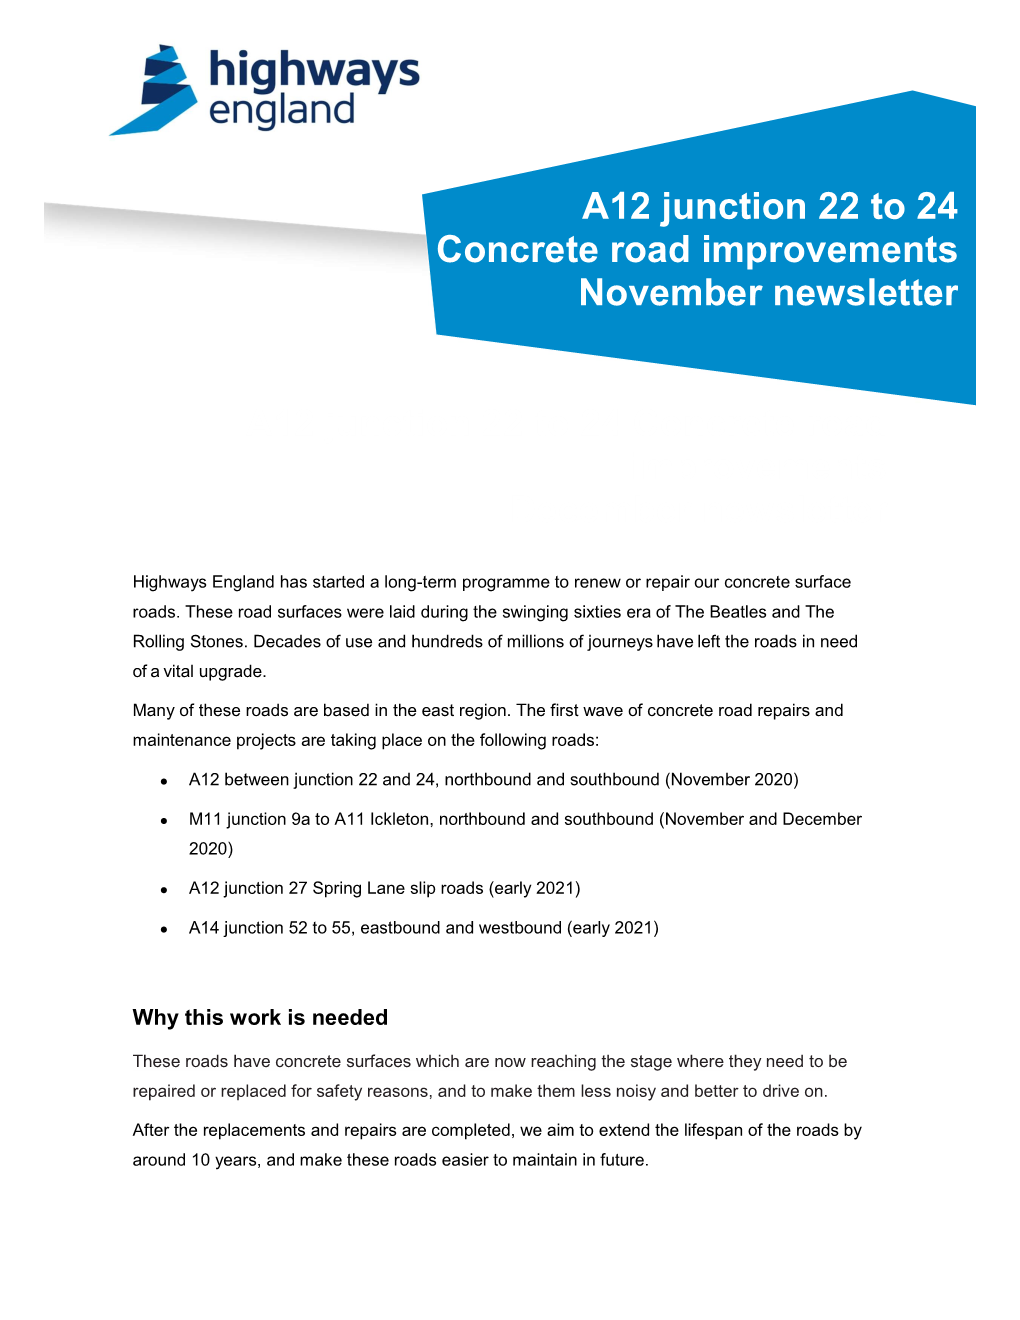 A12 Junction 22 to 24 Concrete Road Improvements December Newsletter